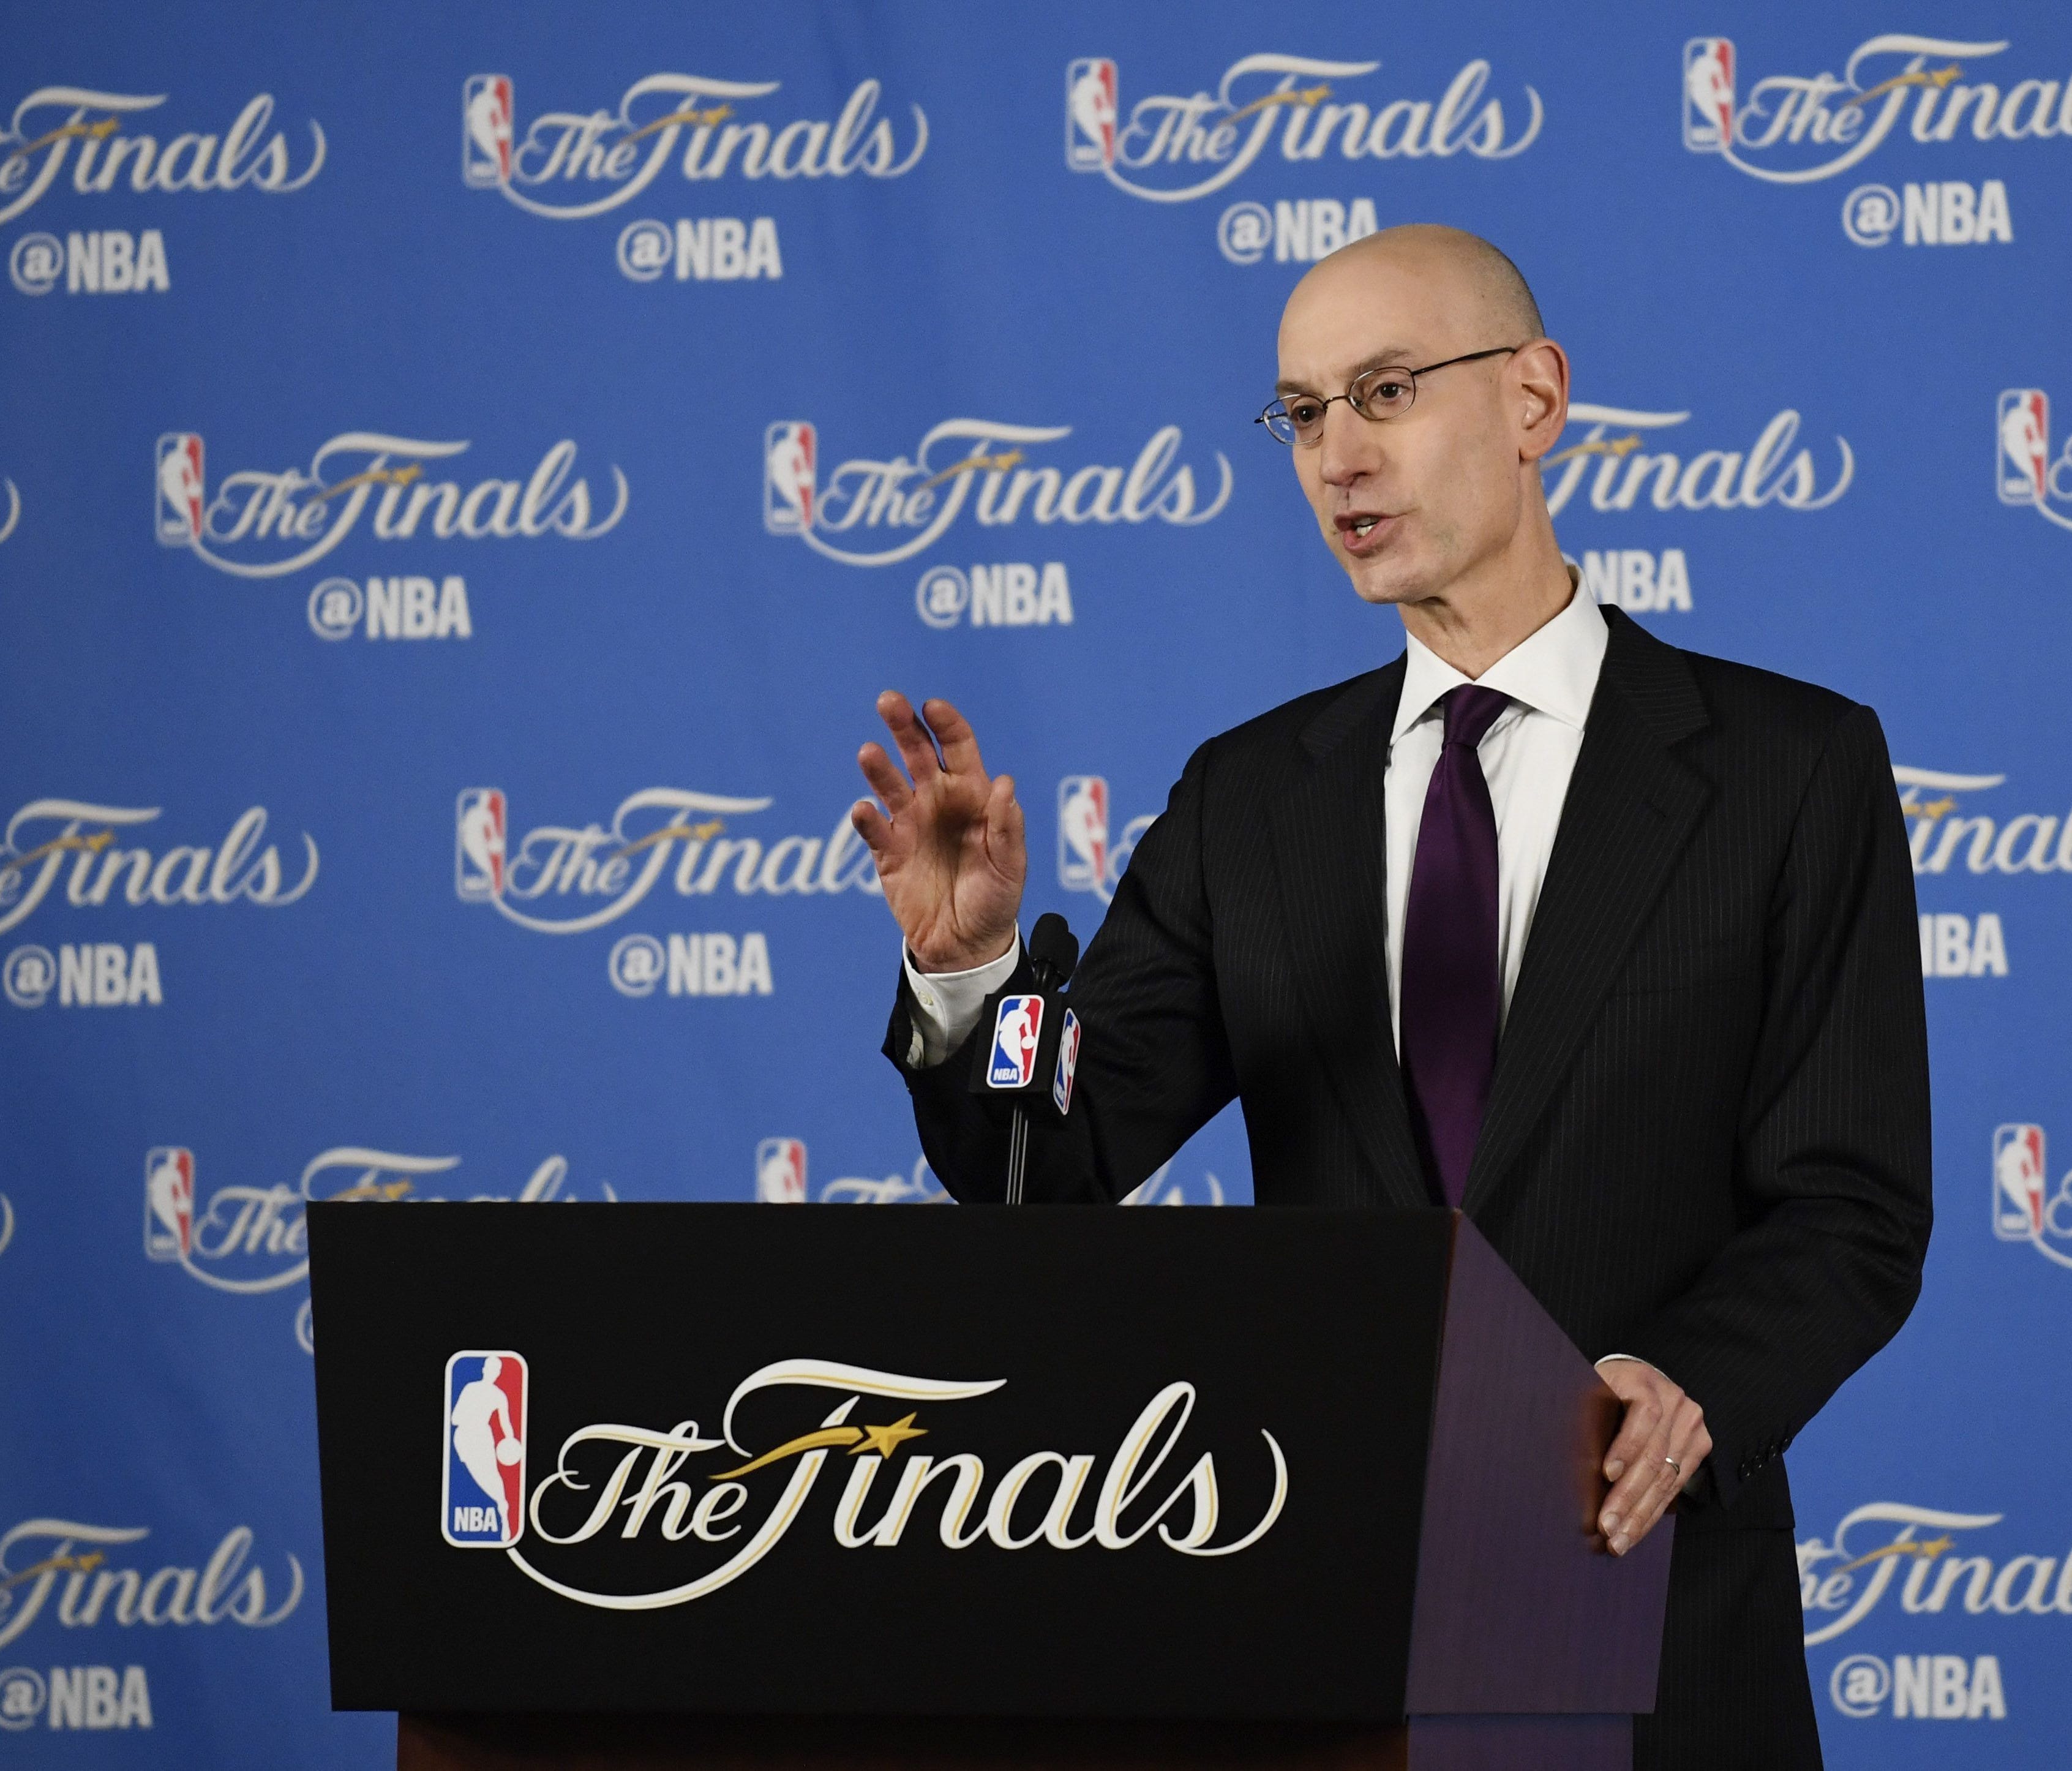 NBA commissioner Adam Silver speaks at a press conference before Game 1 of the Finals.